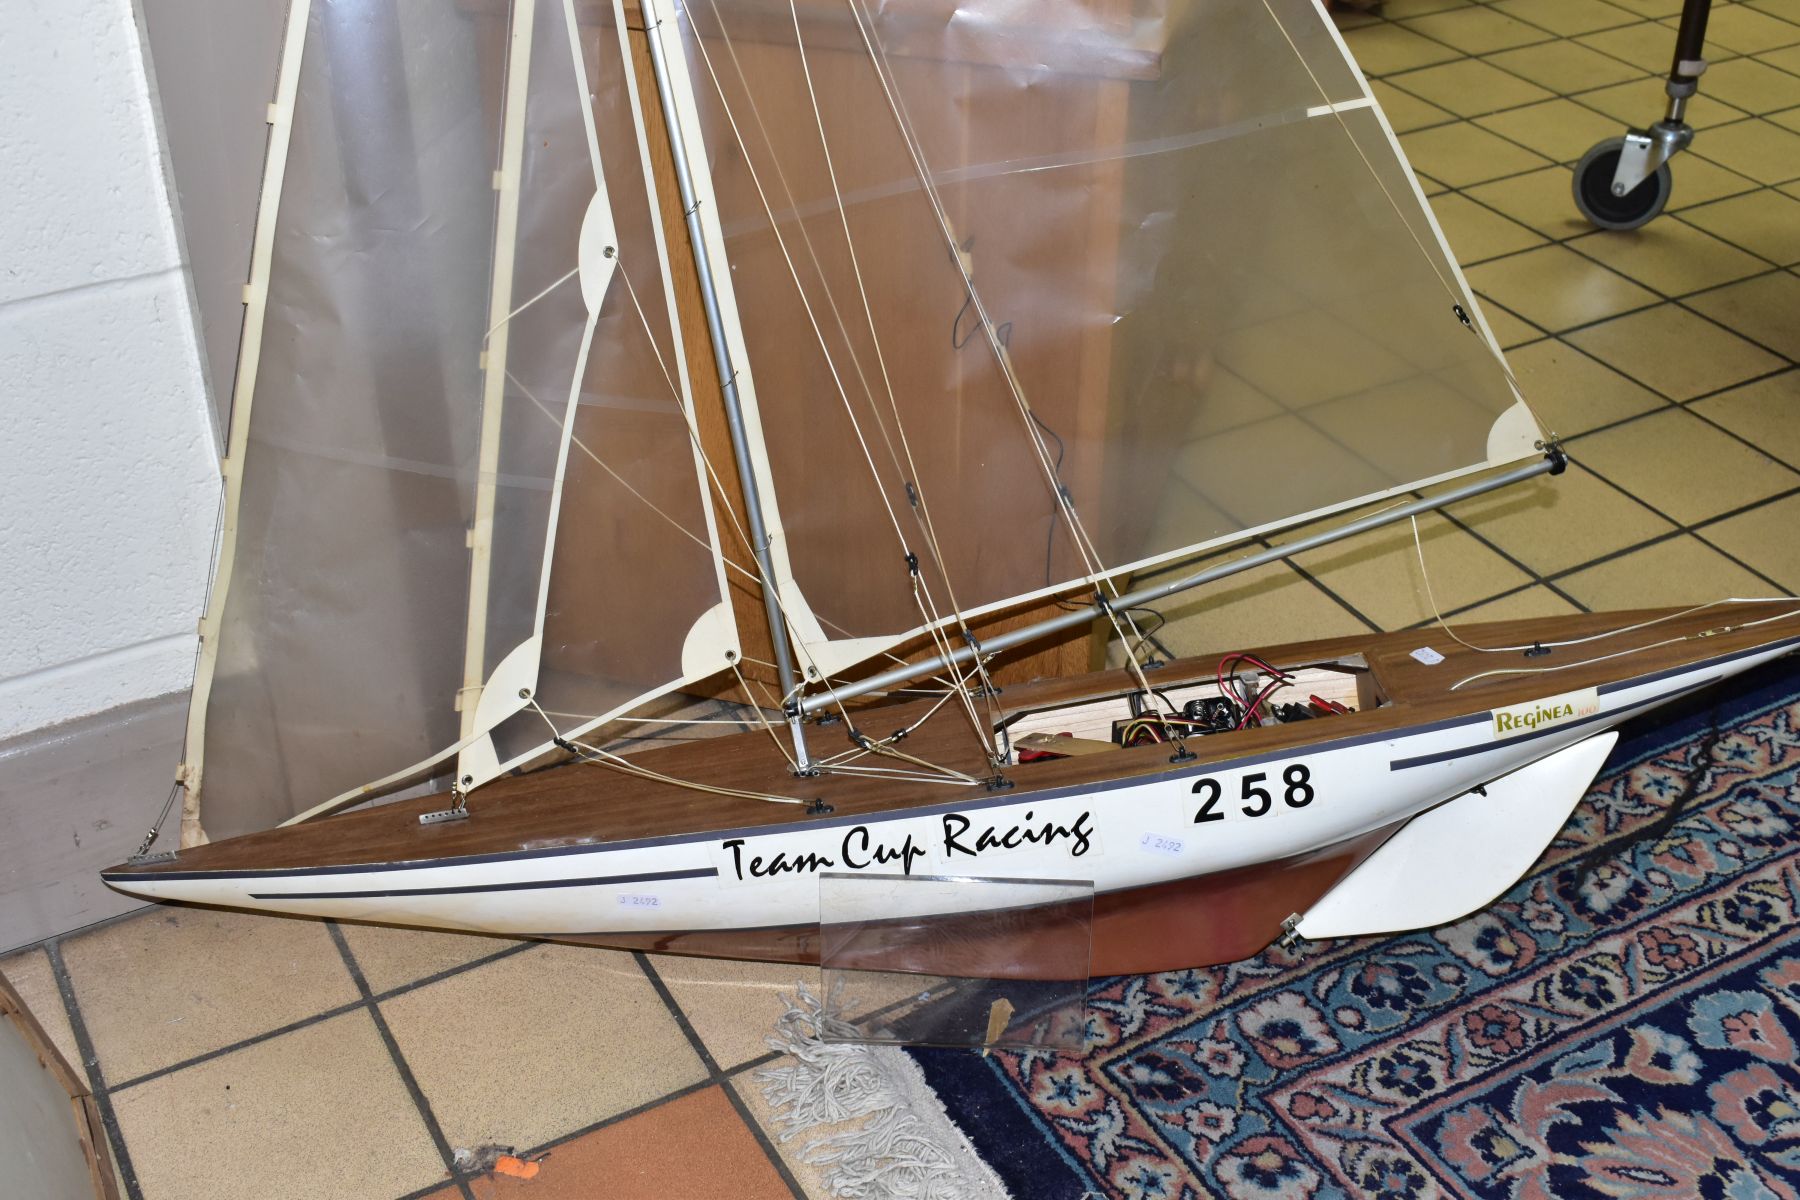 A SCRATCH BUILT MODEL YACHT, at full sail, the deck with rigging and clear sails, motor in hull,